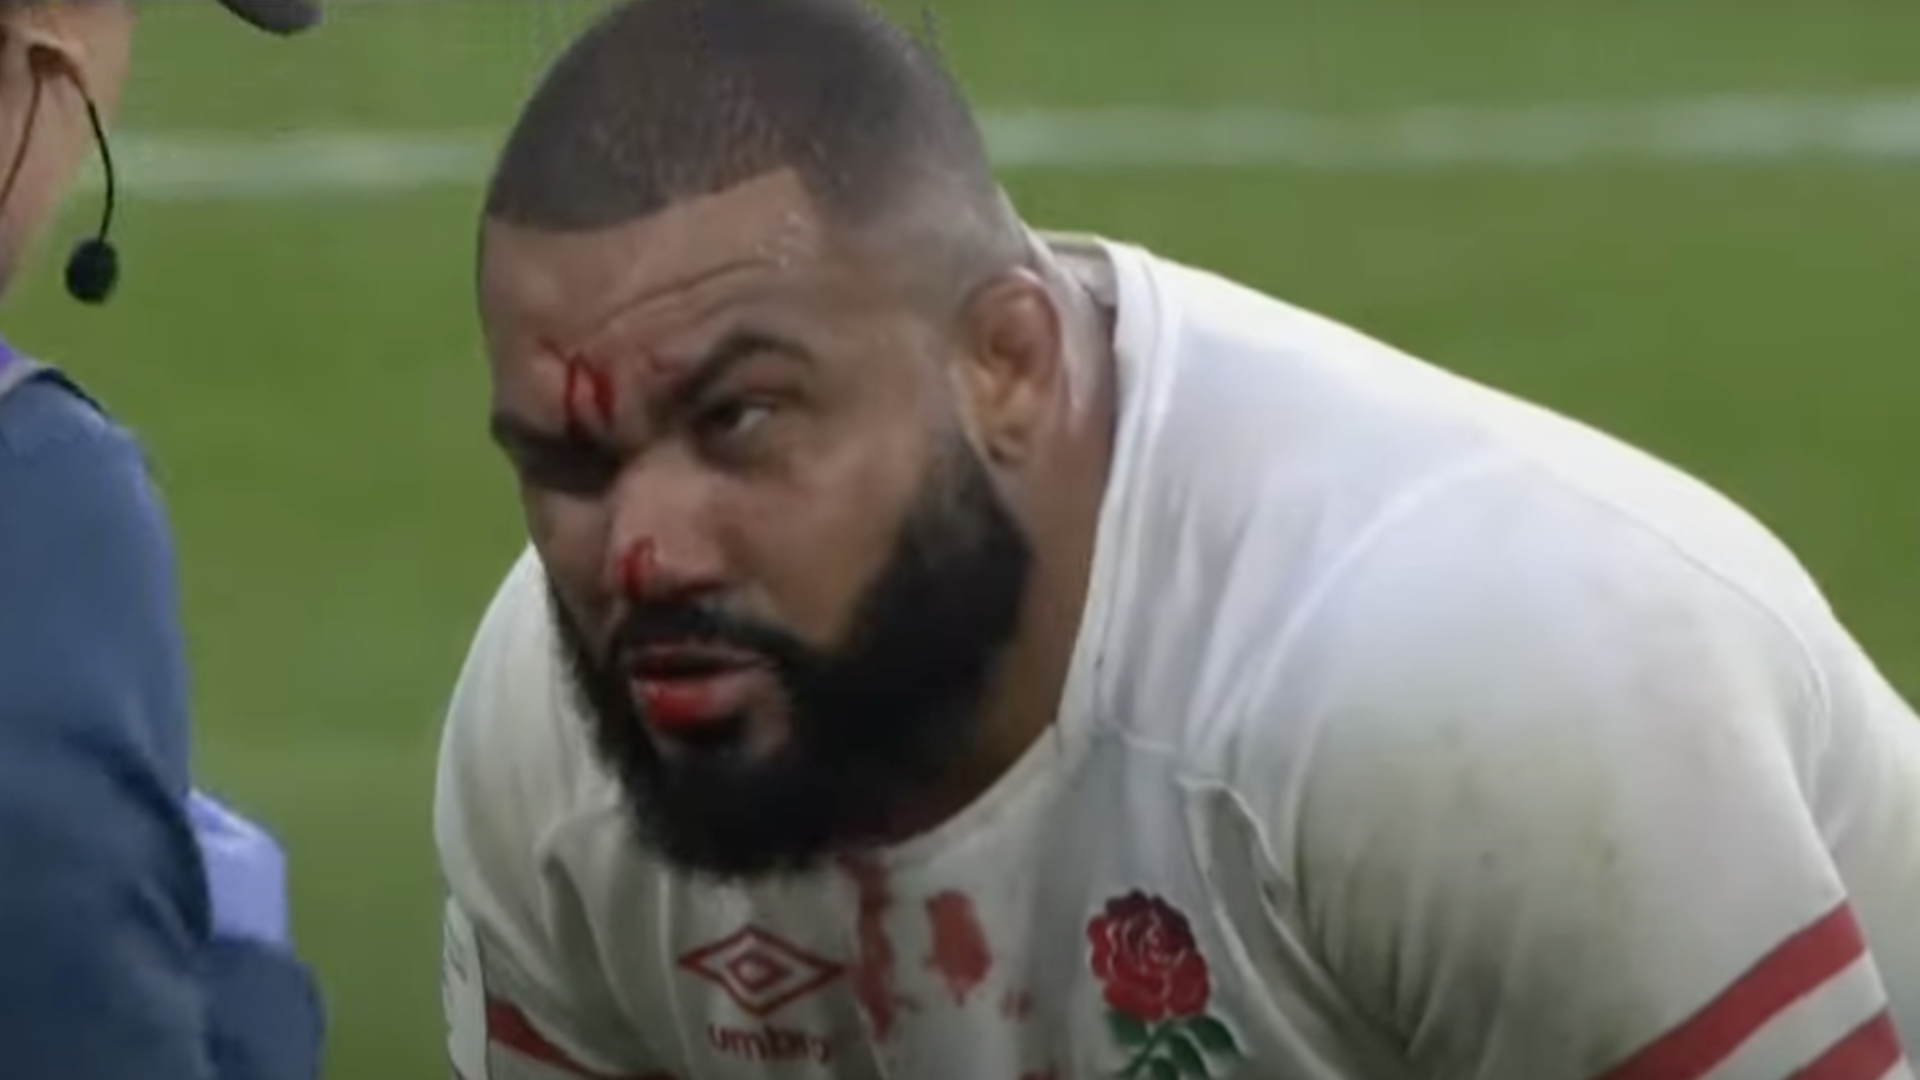 England's Kyle Sinckler reveals new look for Wales match after gory injury